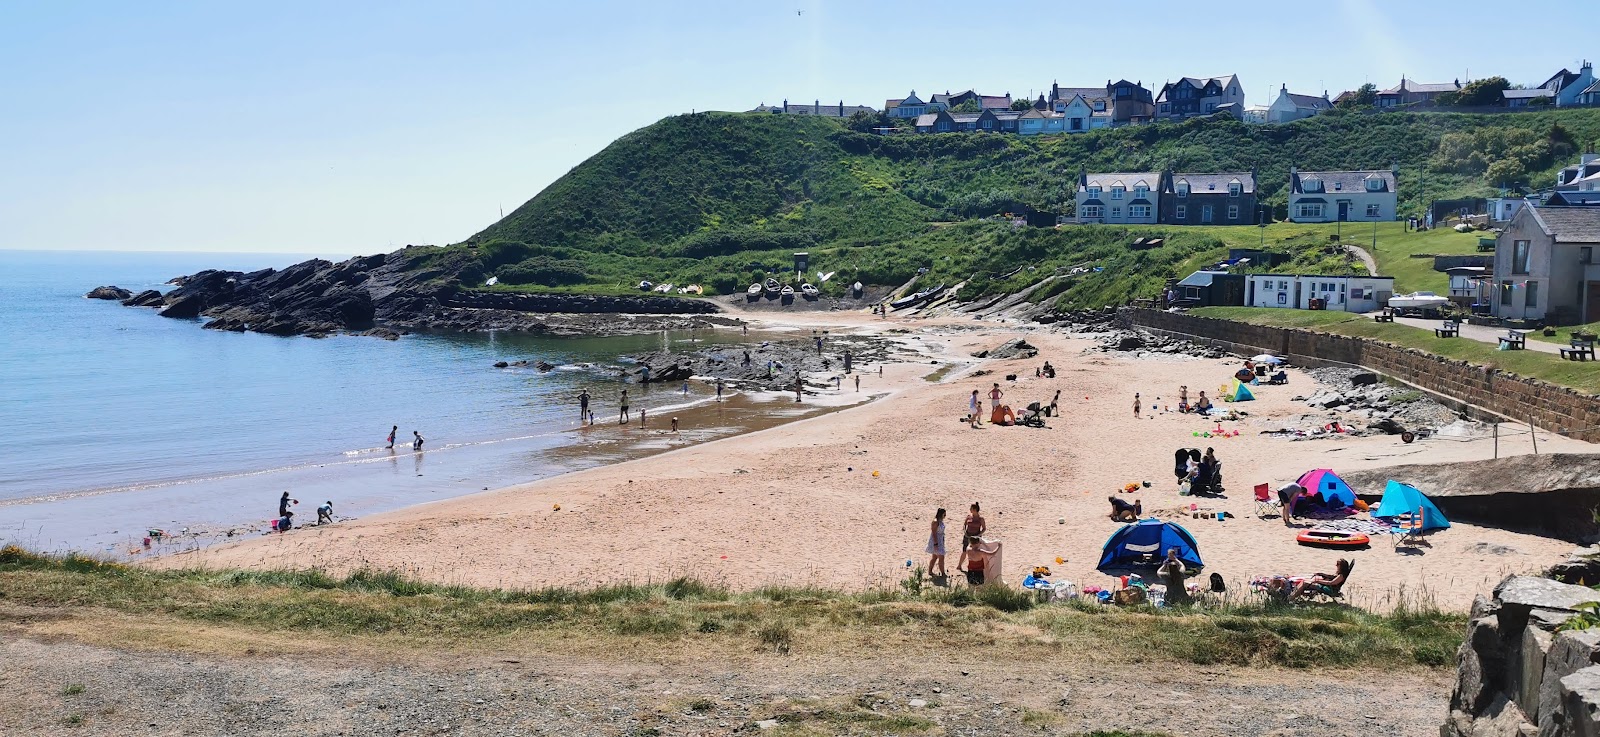 Photo of Collieston Beach with bright sand surface